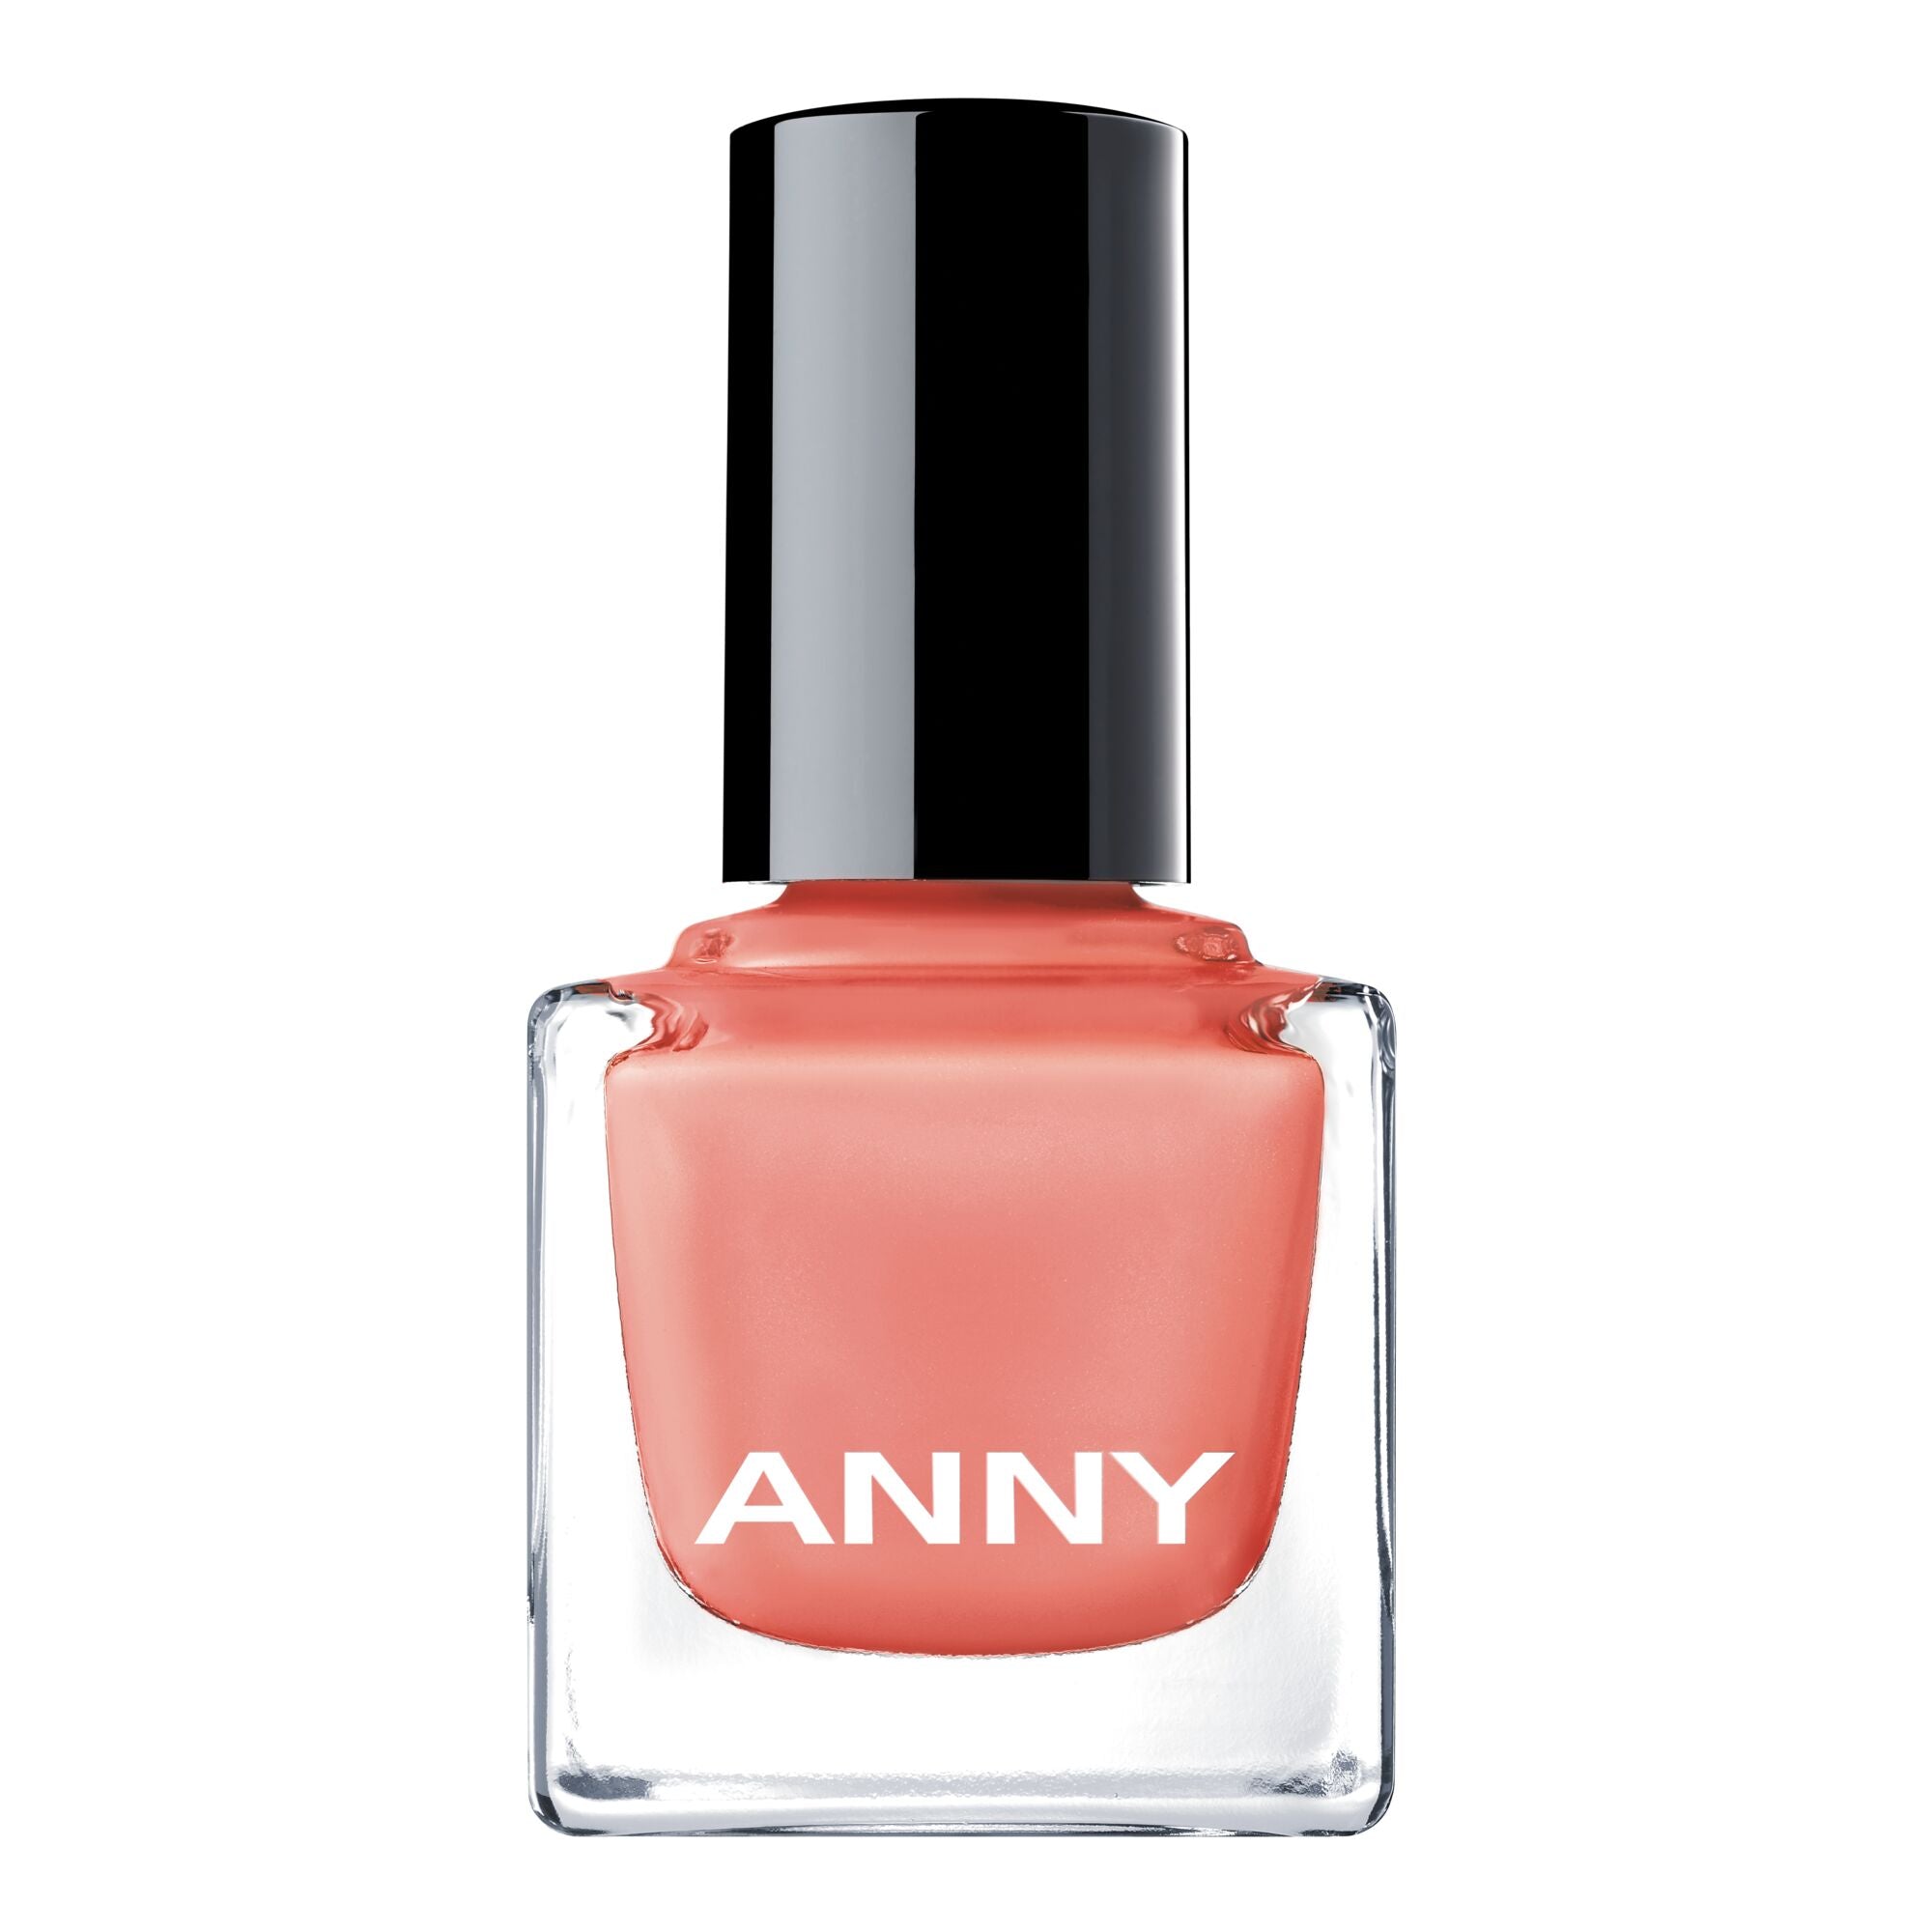 Anny Nail Polish - The Heat is On